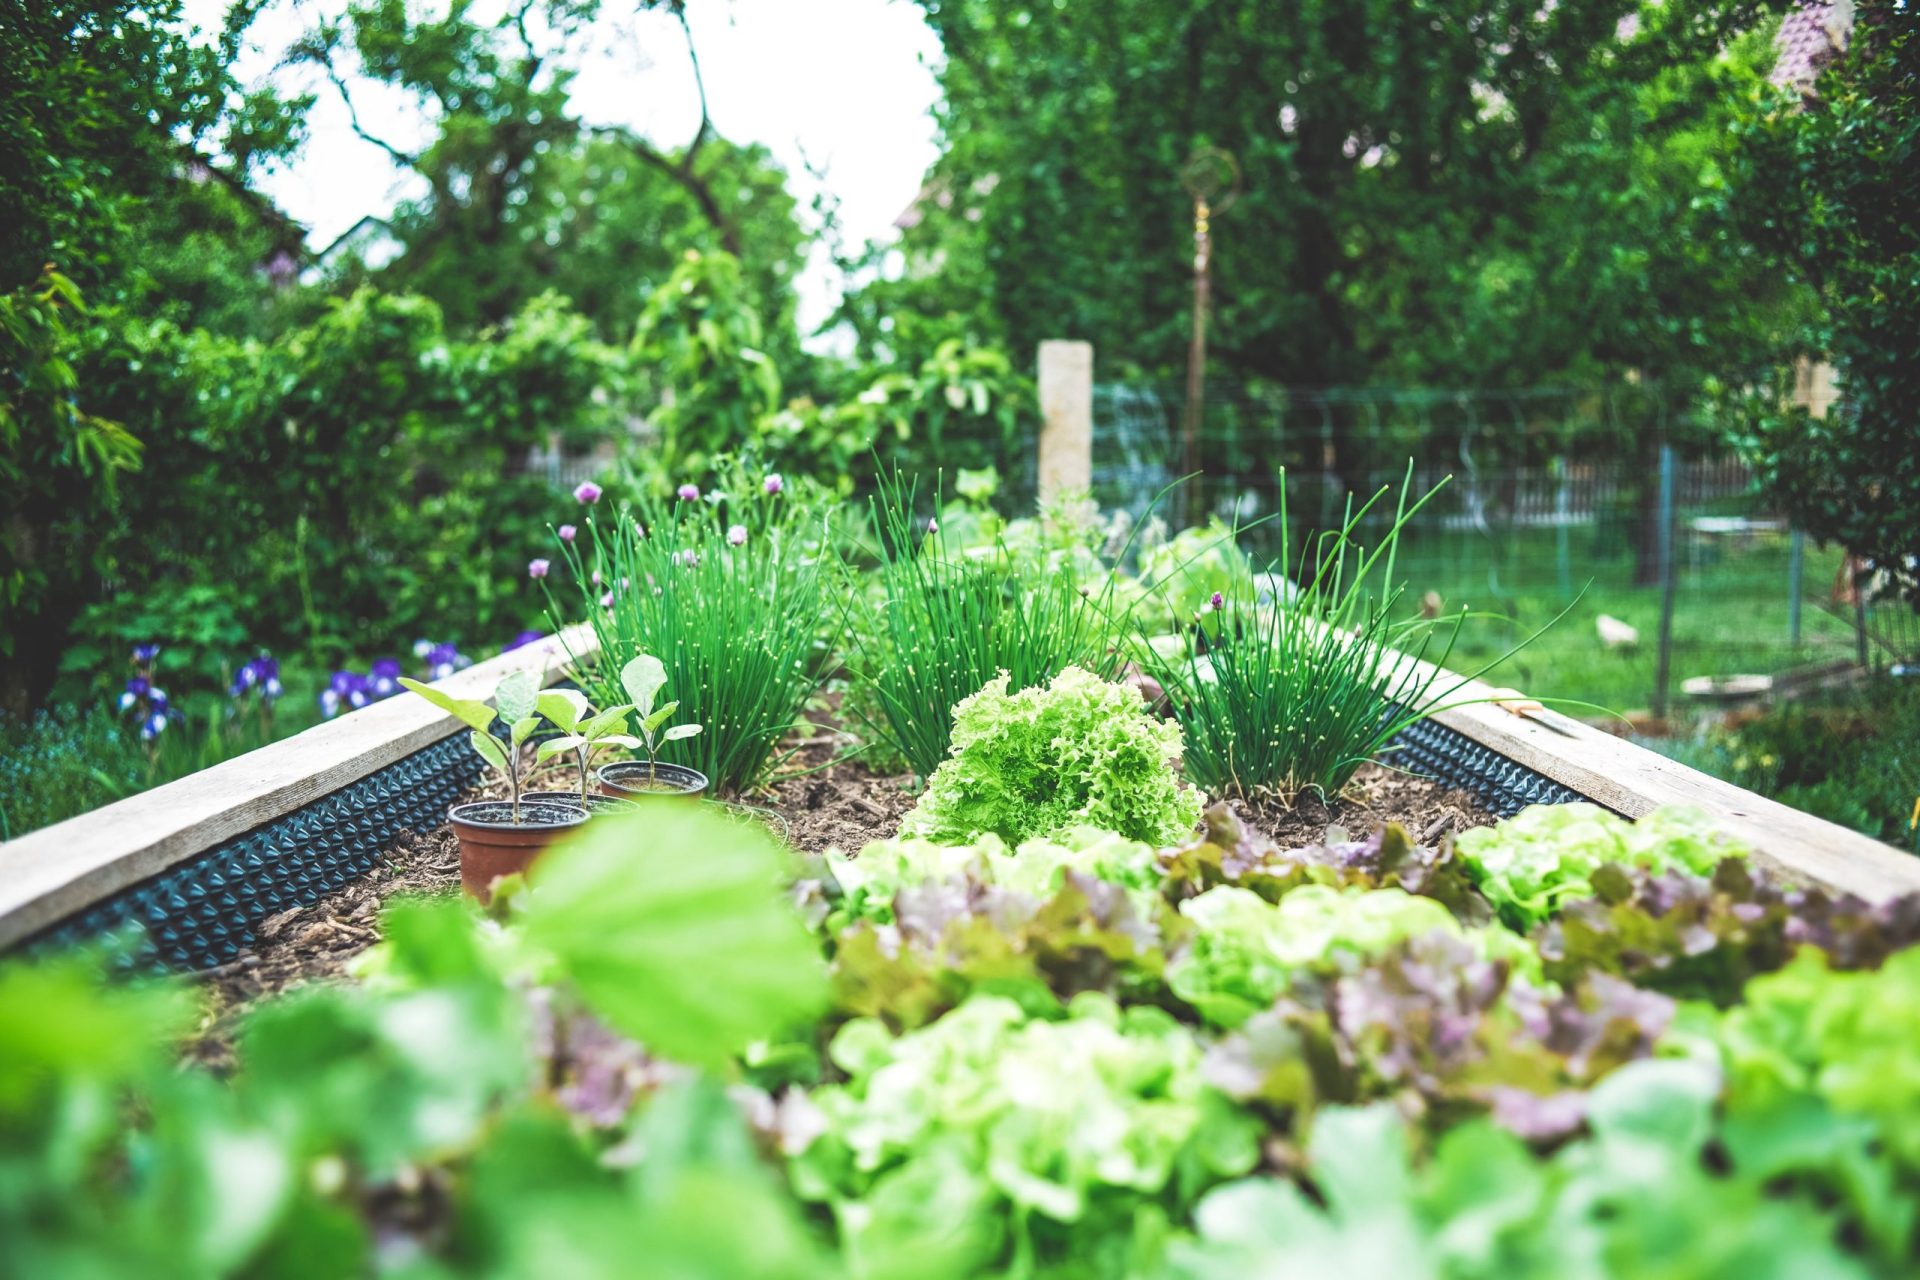 Urban Gardens and Regenerative Agriculture: How Small-Scale Farms Could be the Future of Food Production.